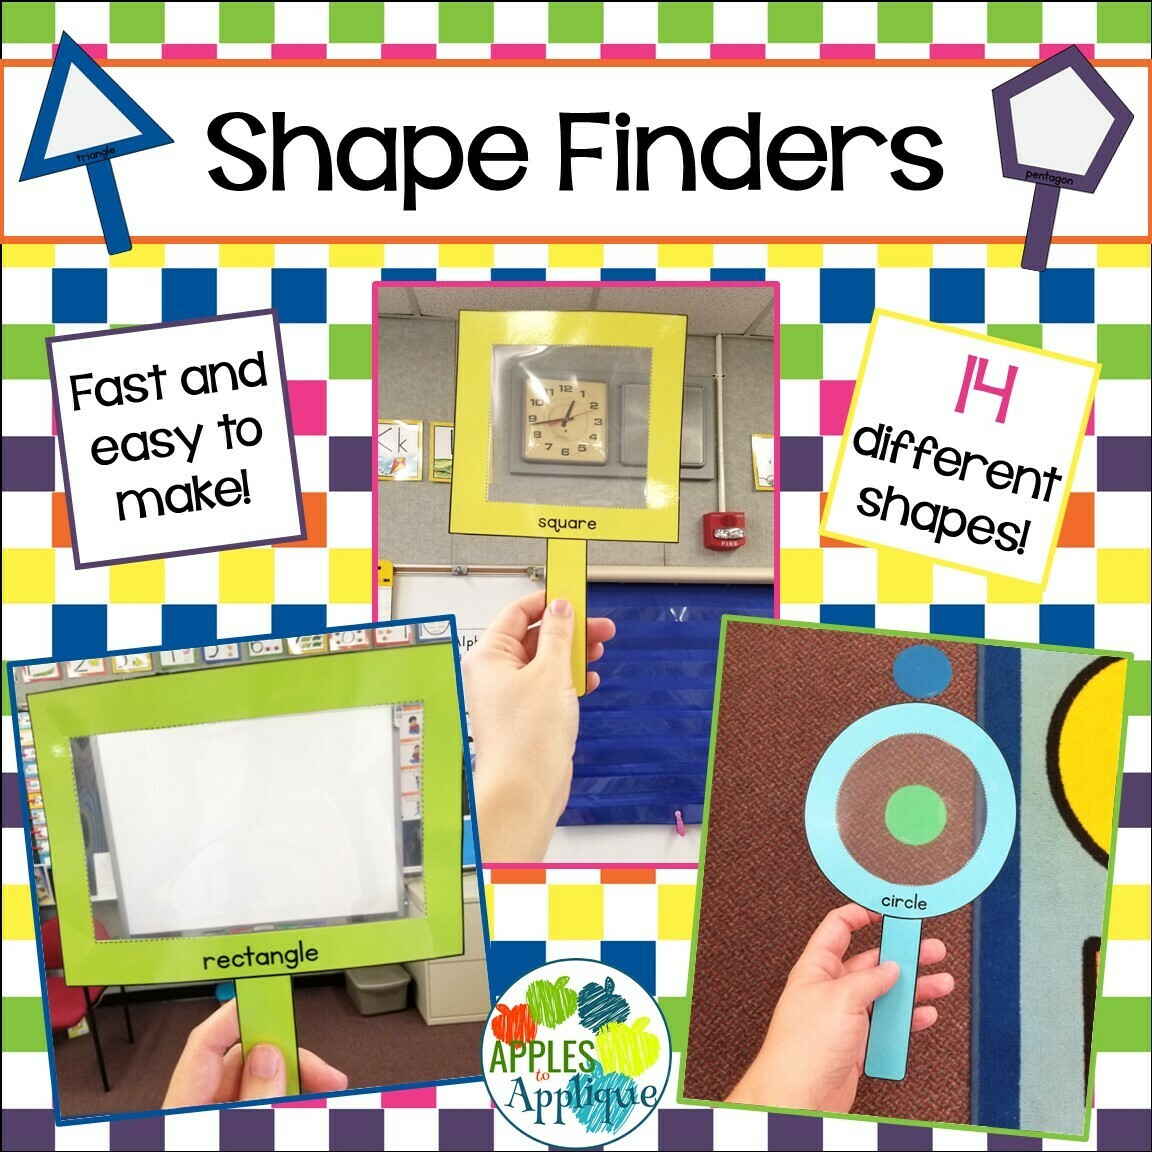 Making shape finders to teach toddlers shapes